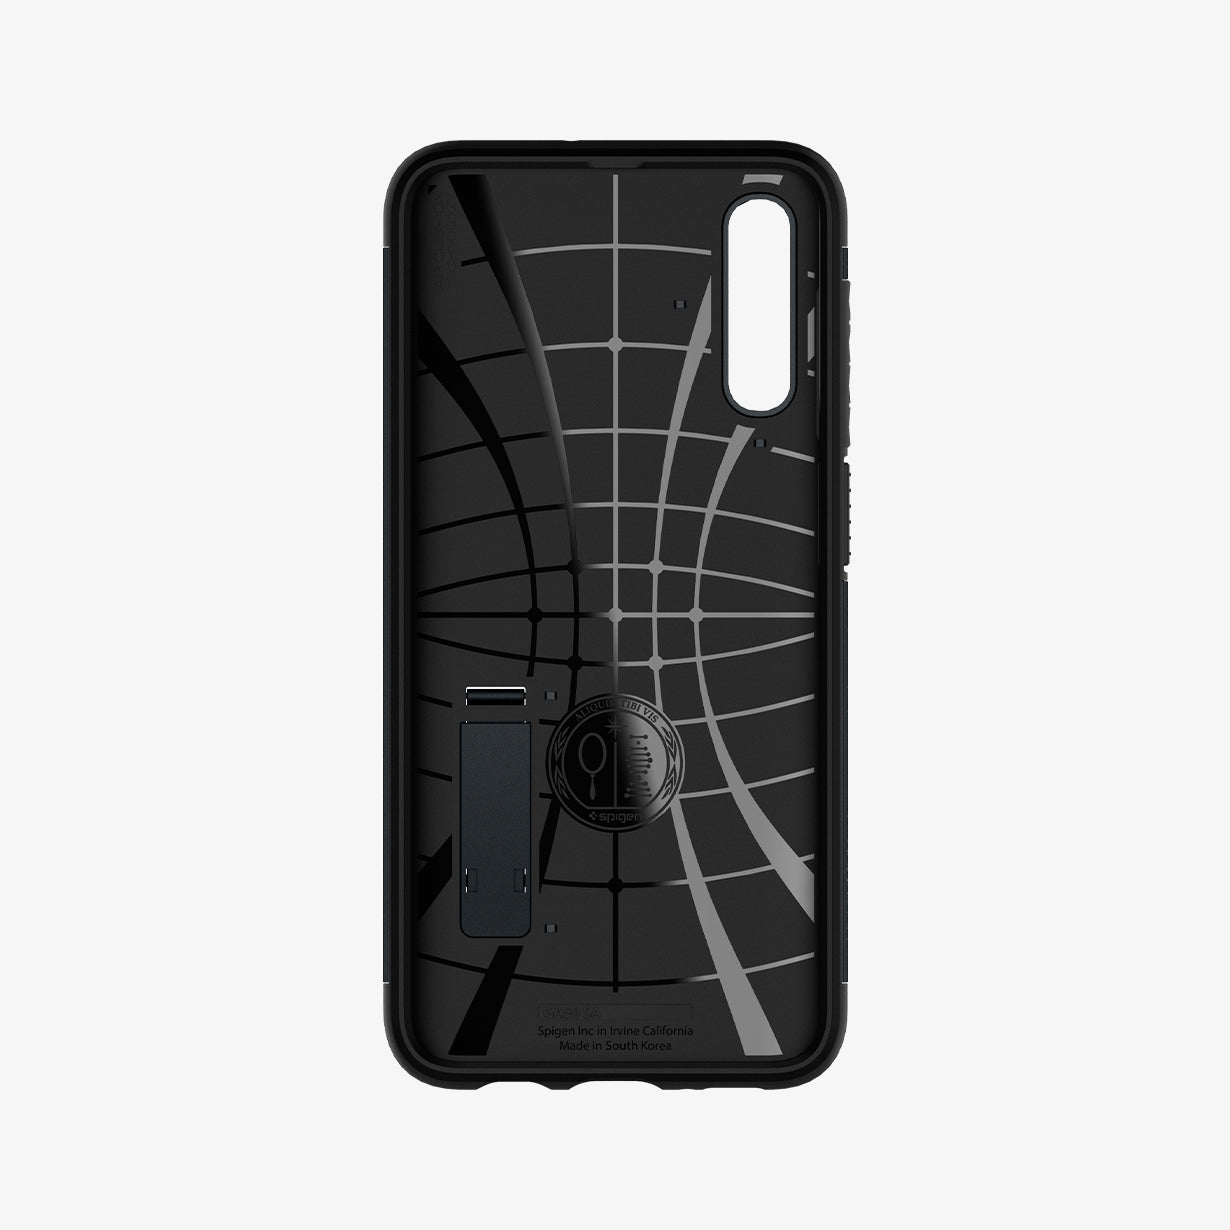 611CS26021 - Galaxy A50 Case Slim Armor in Metal Slate showing the inner case with spider web pattern